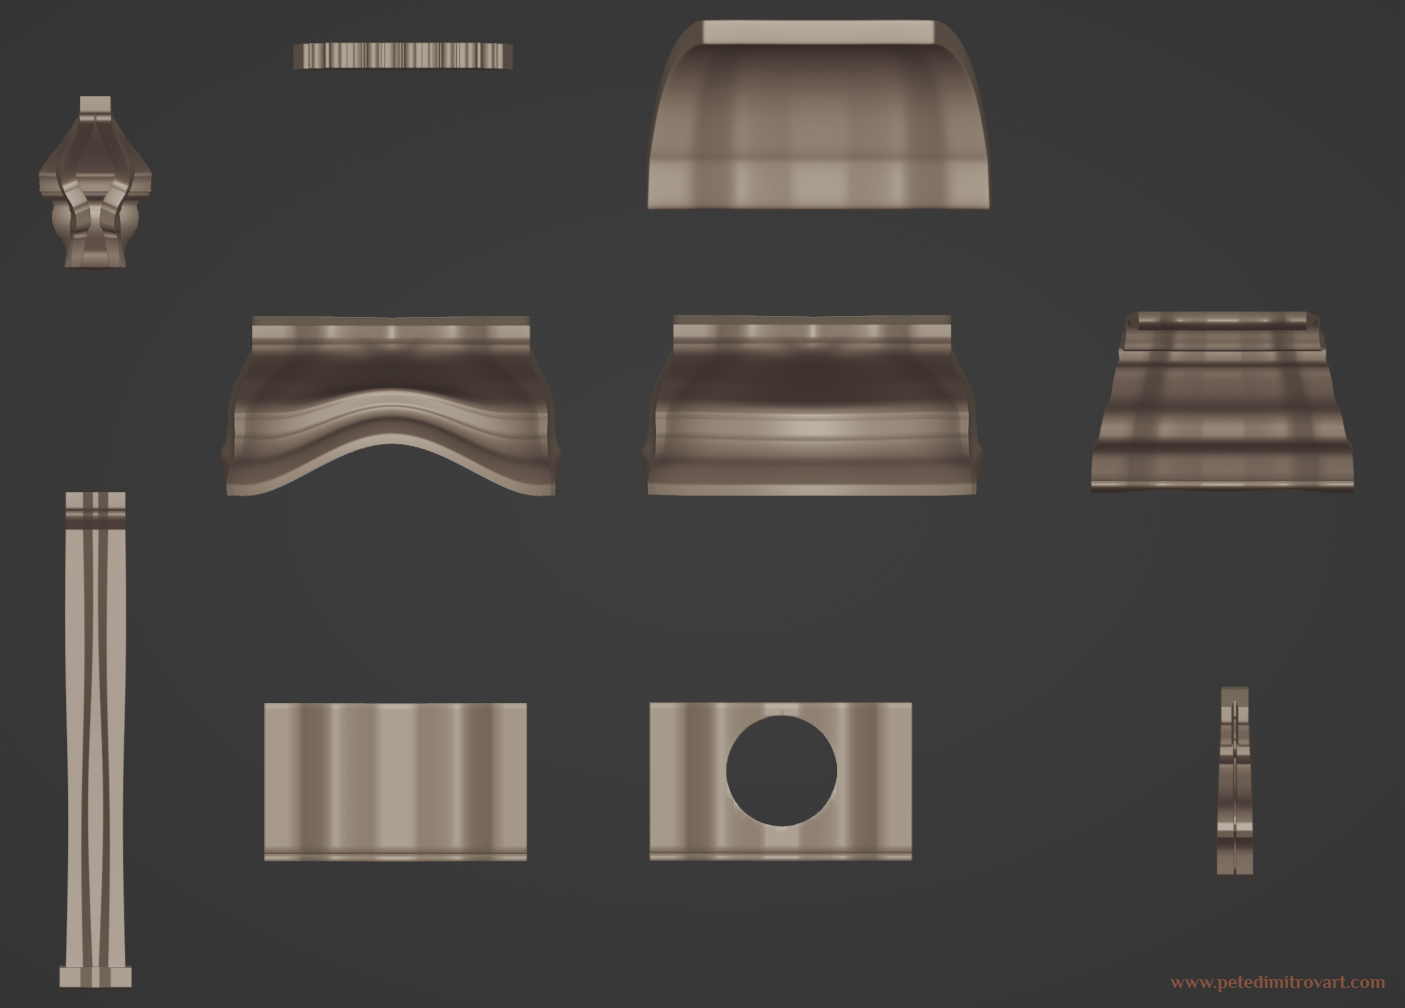 Blender screenshot. Shows eight initial blockout assets. Includes architectural pieces like pillar, flat wall, wall with a circular window cut, ceiling dome pieces.